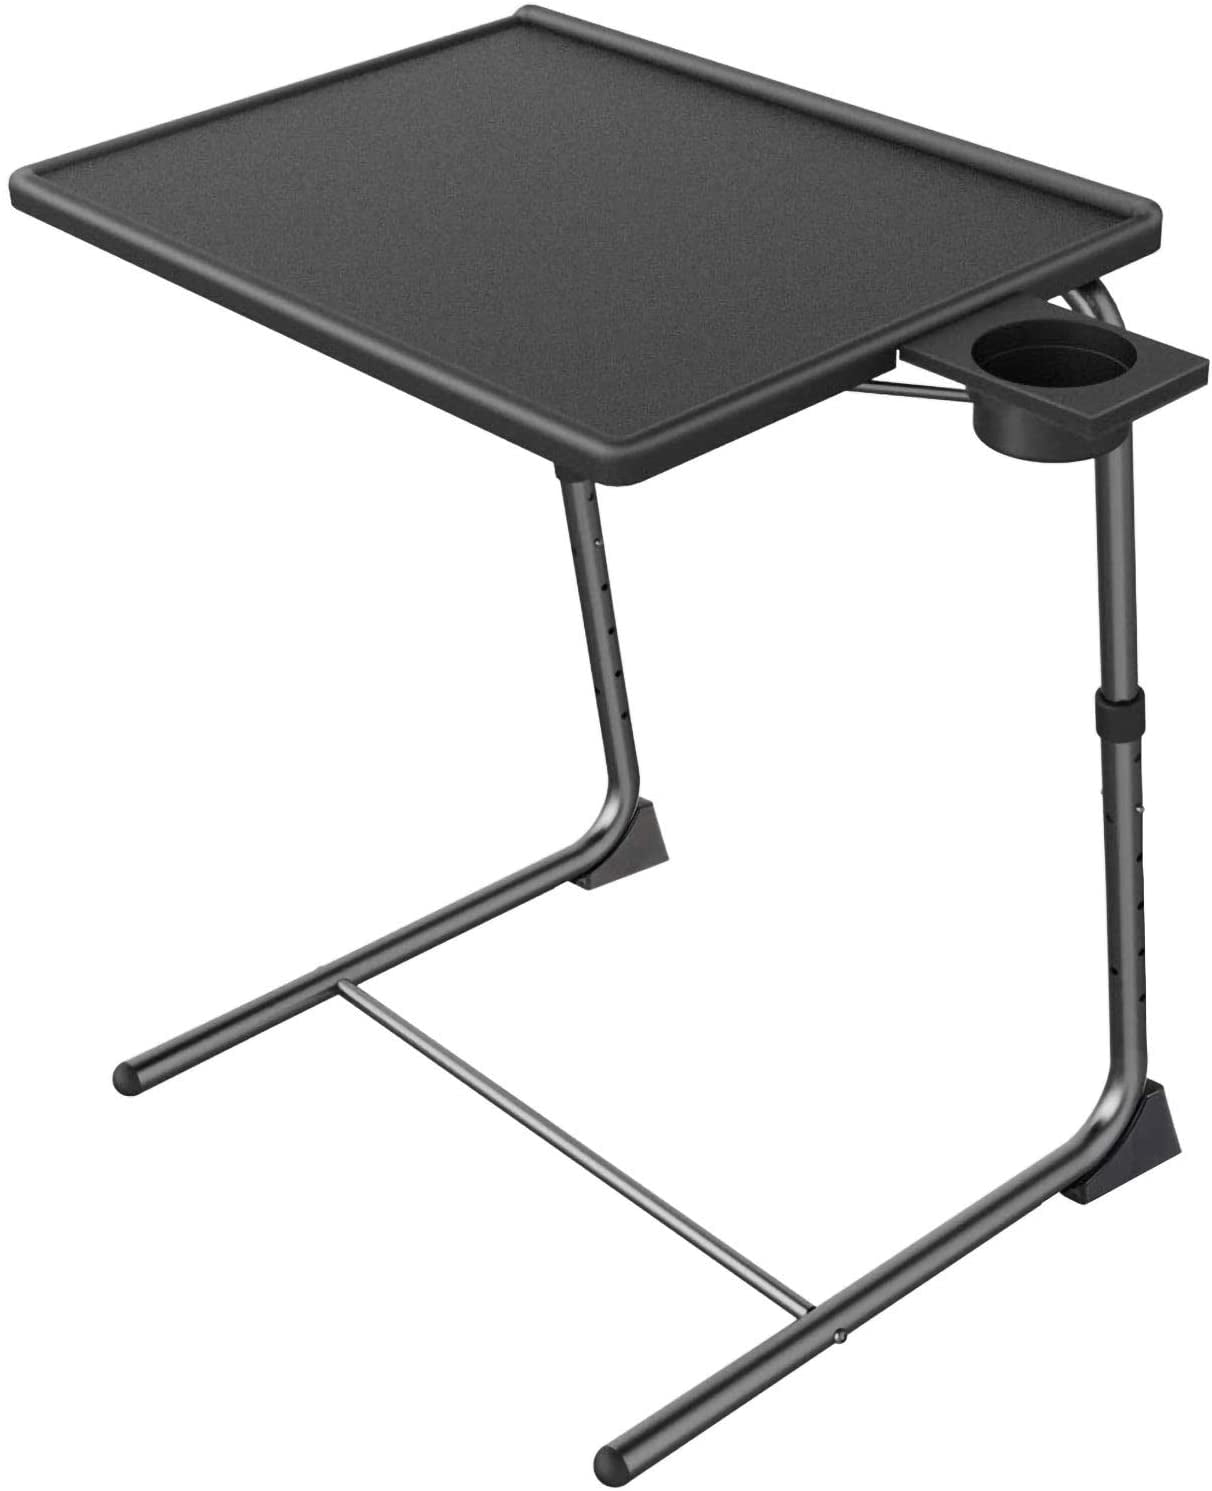 Adjustable to 6 Heights 3 Angles Home Office Desk Portable Table Mate Ultra Folding TV Dinner Laptop Tray Side Table and Cup Holder